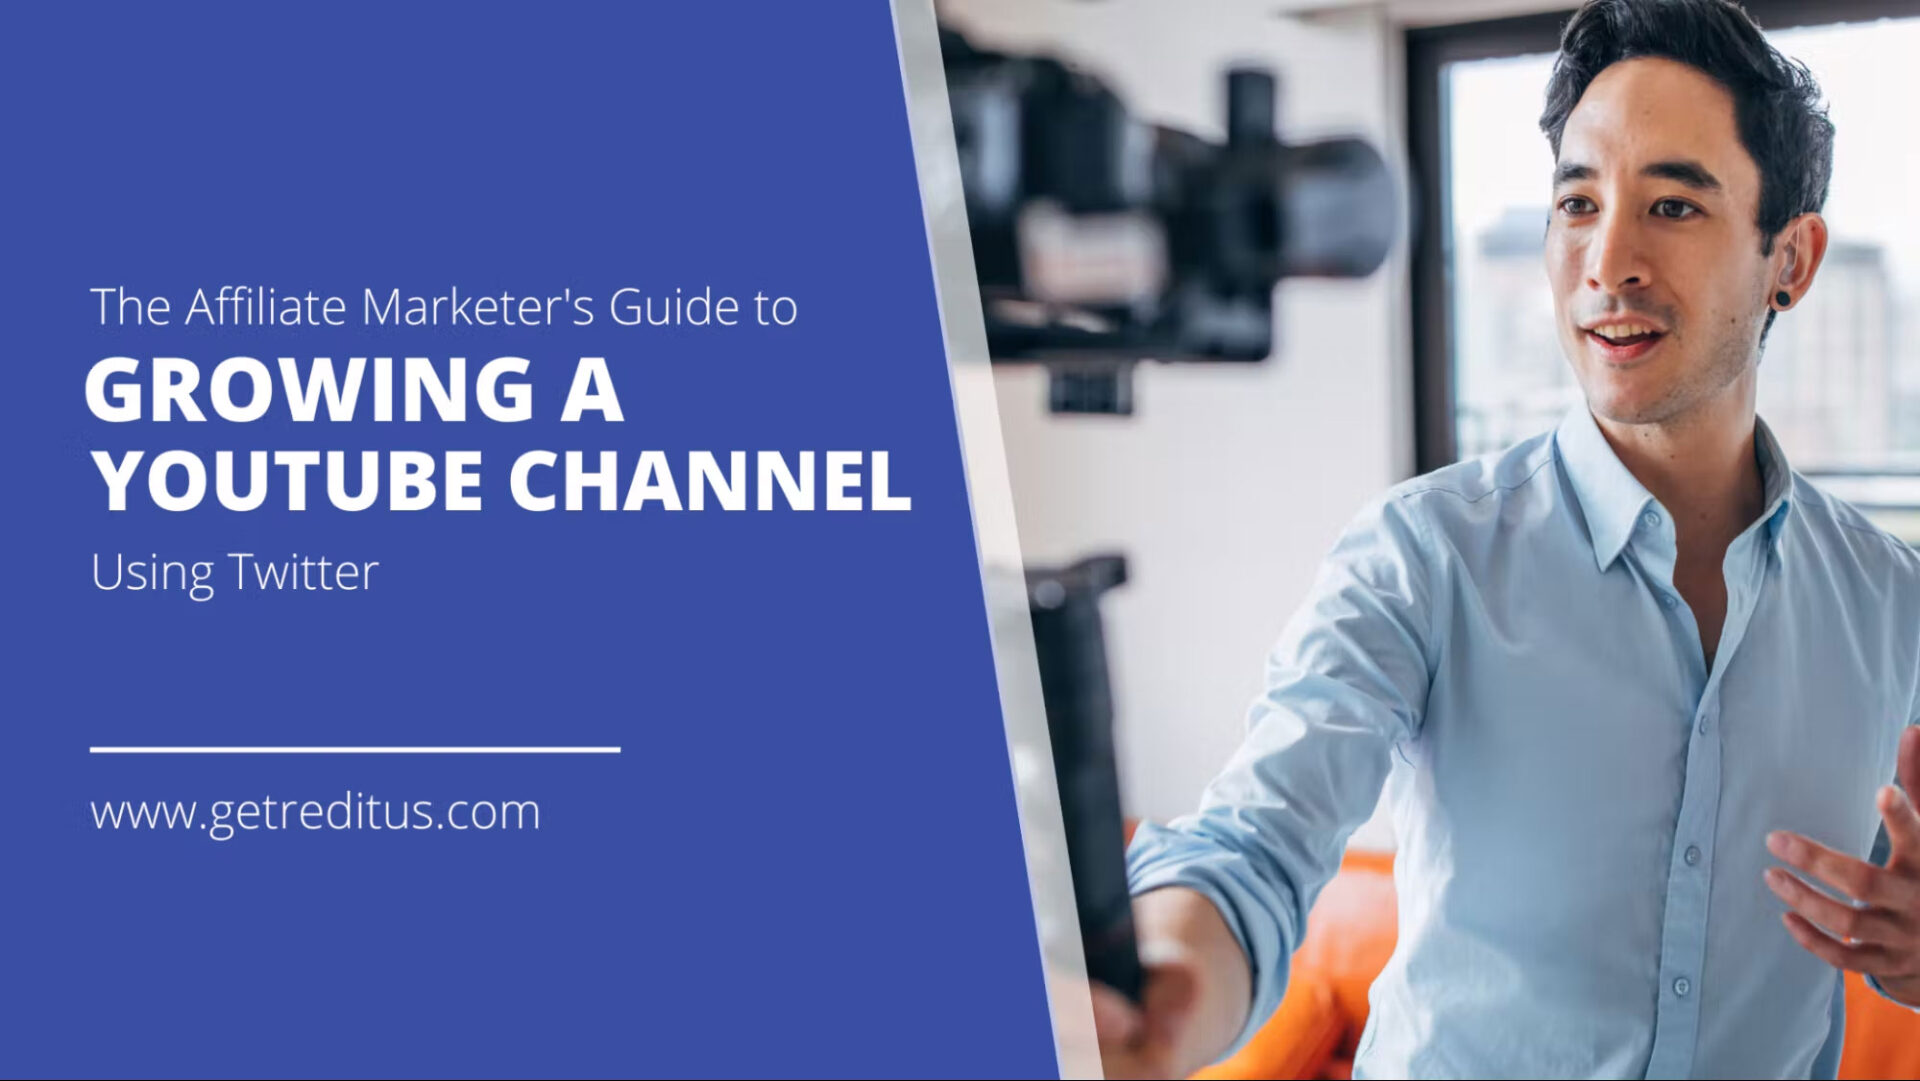 https://www.getreditus.com/blog/the-affiliate-marketers-guide-to-growing-a-youtube-channel/